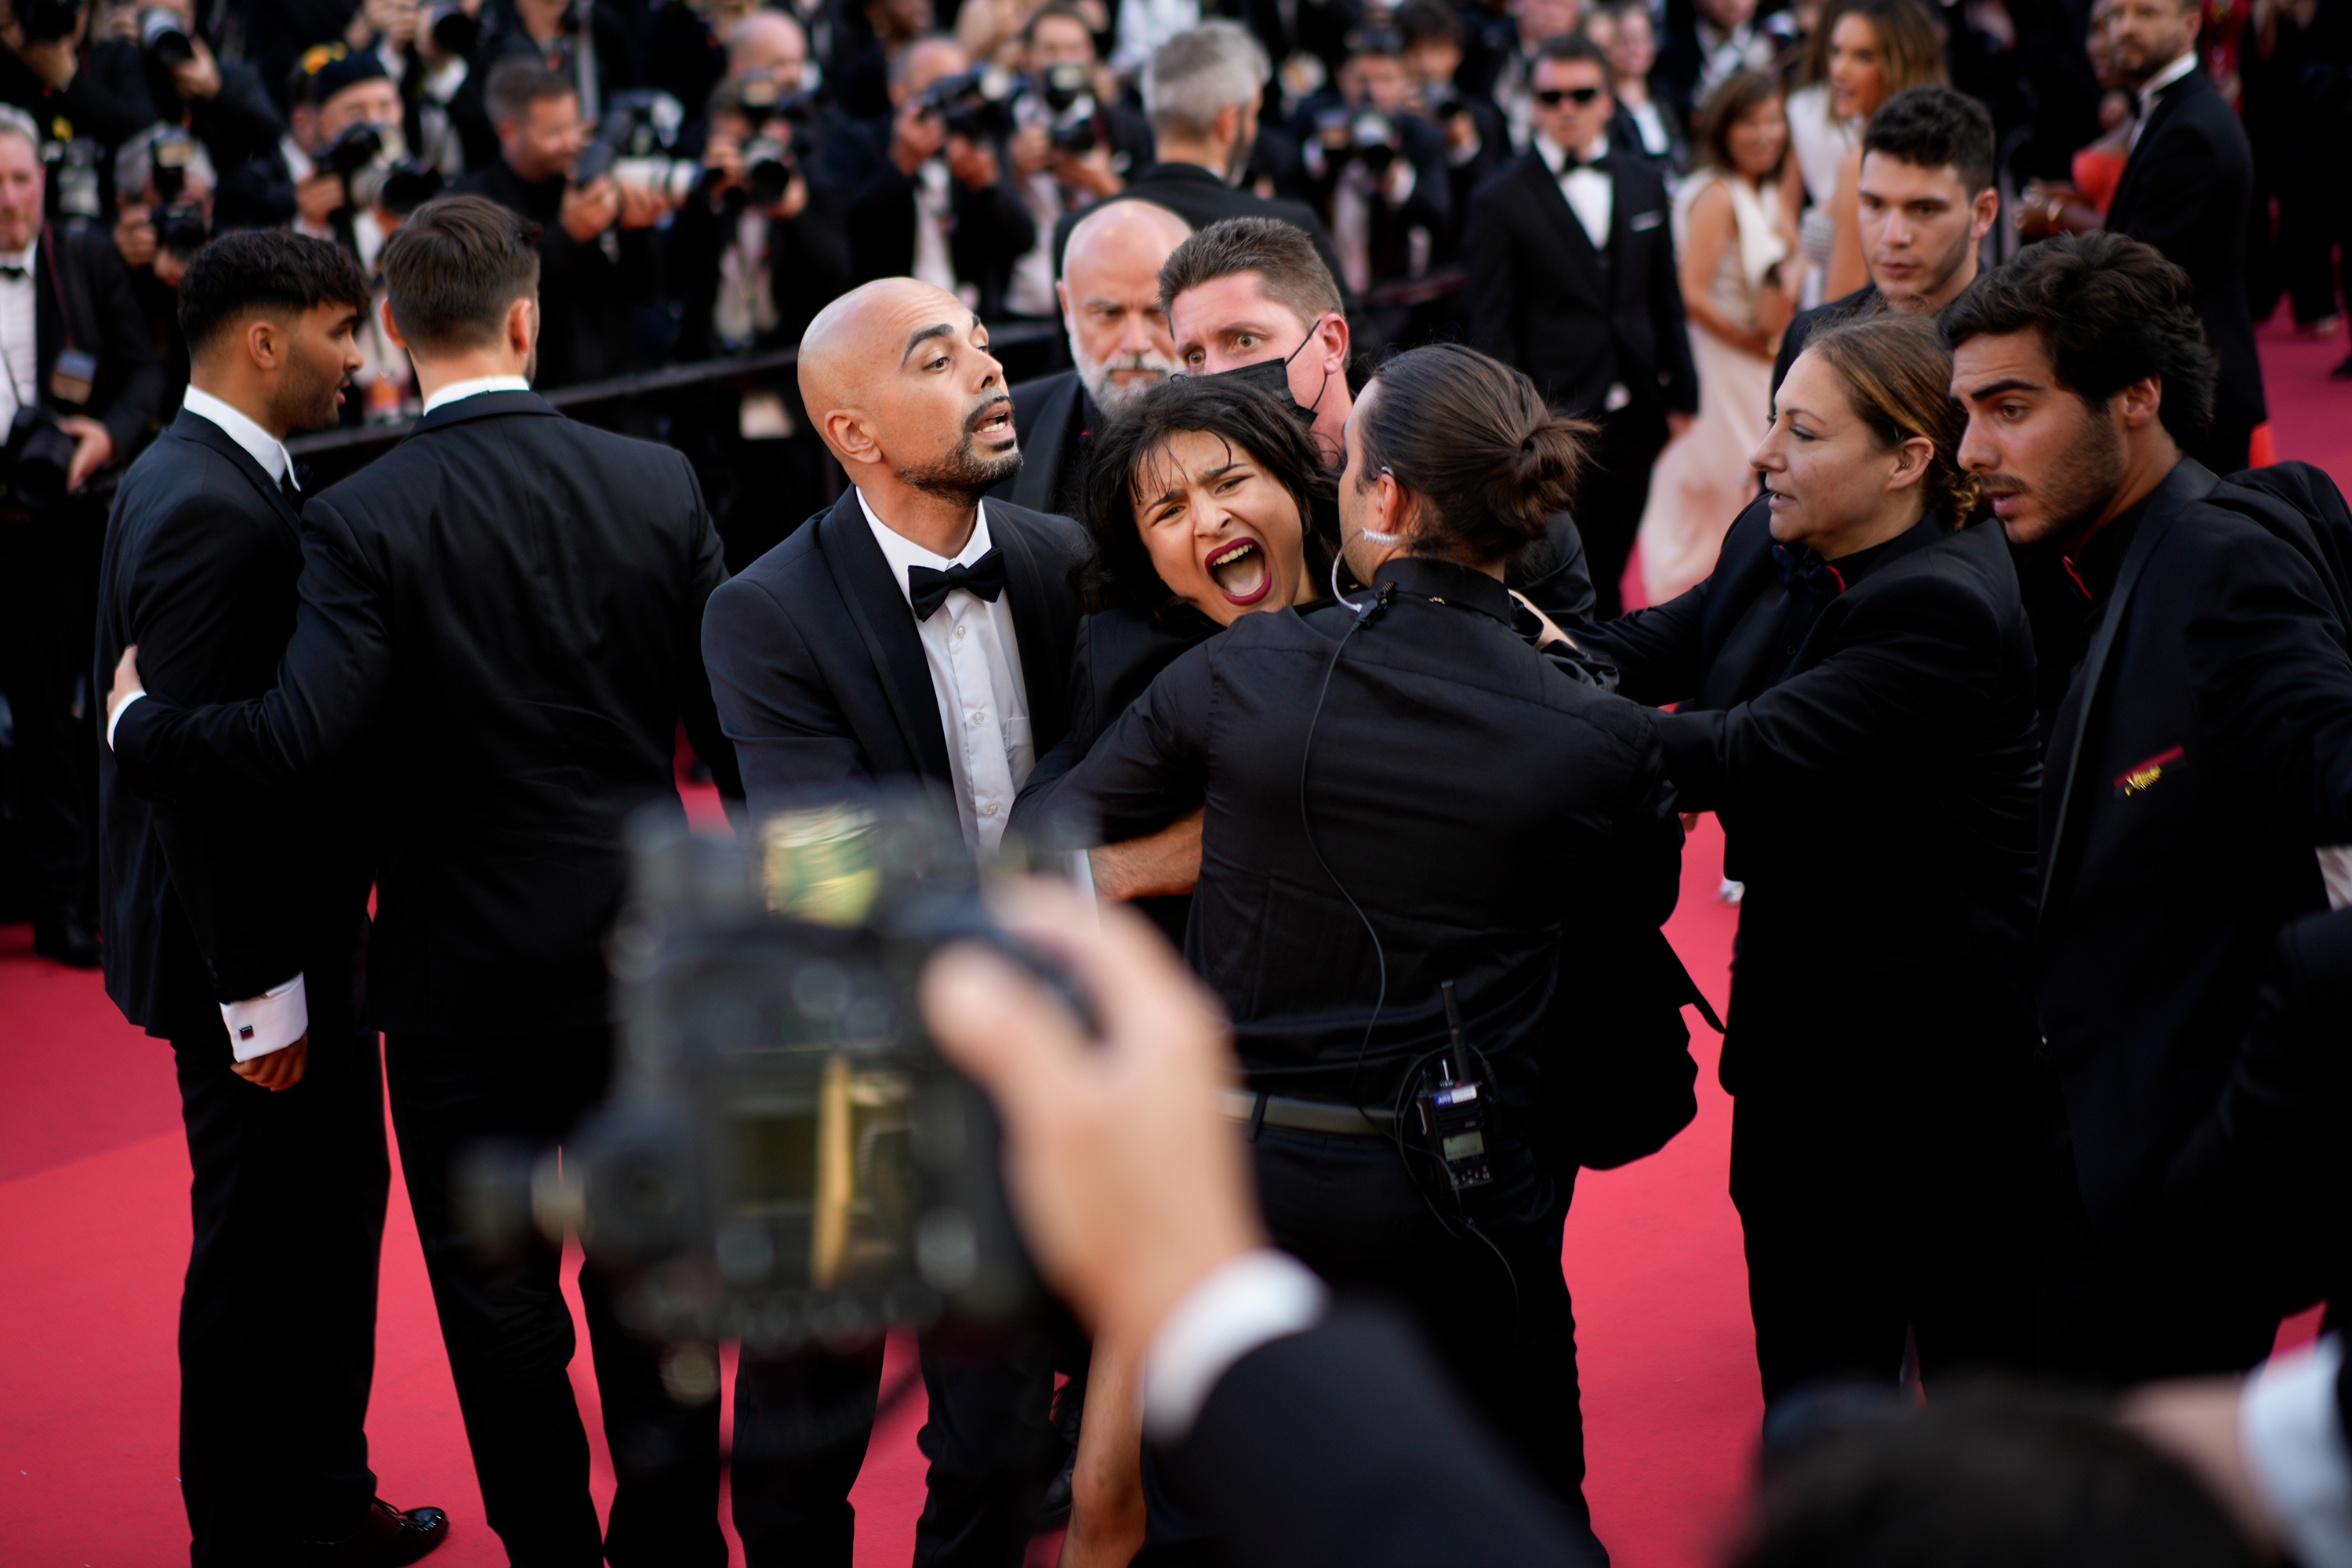 Security guards cover a topless protester after she ran onto the red carpet at the Cannes Film Festival on May 20. 